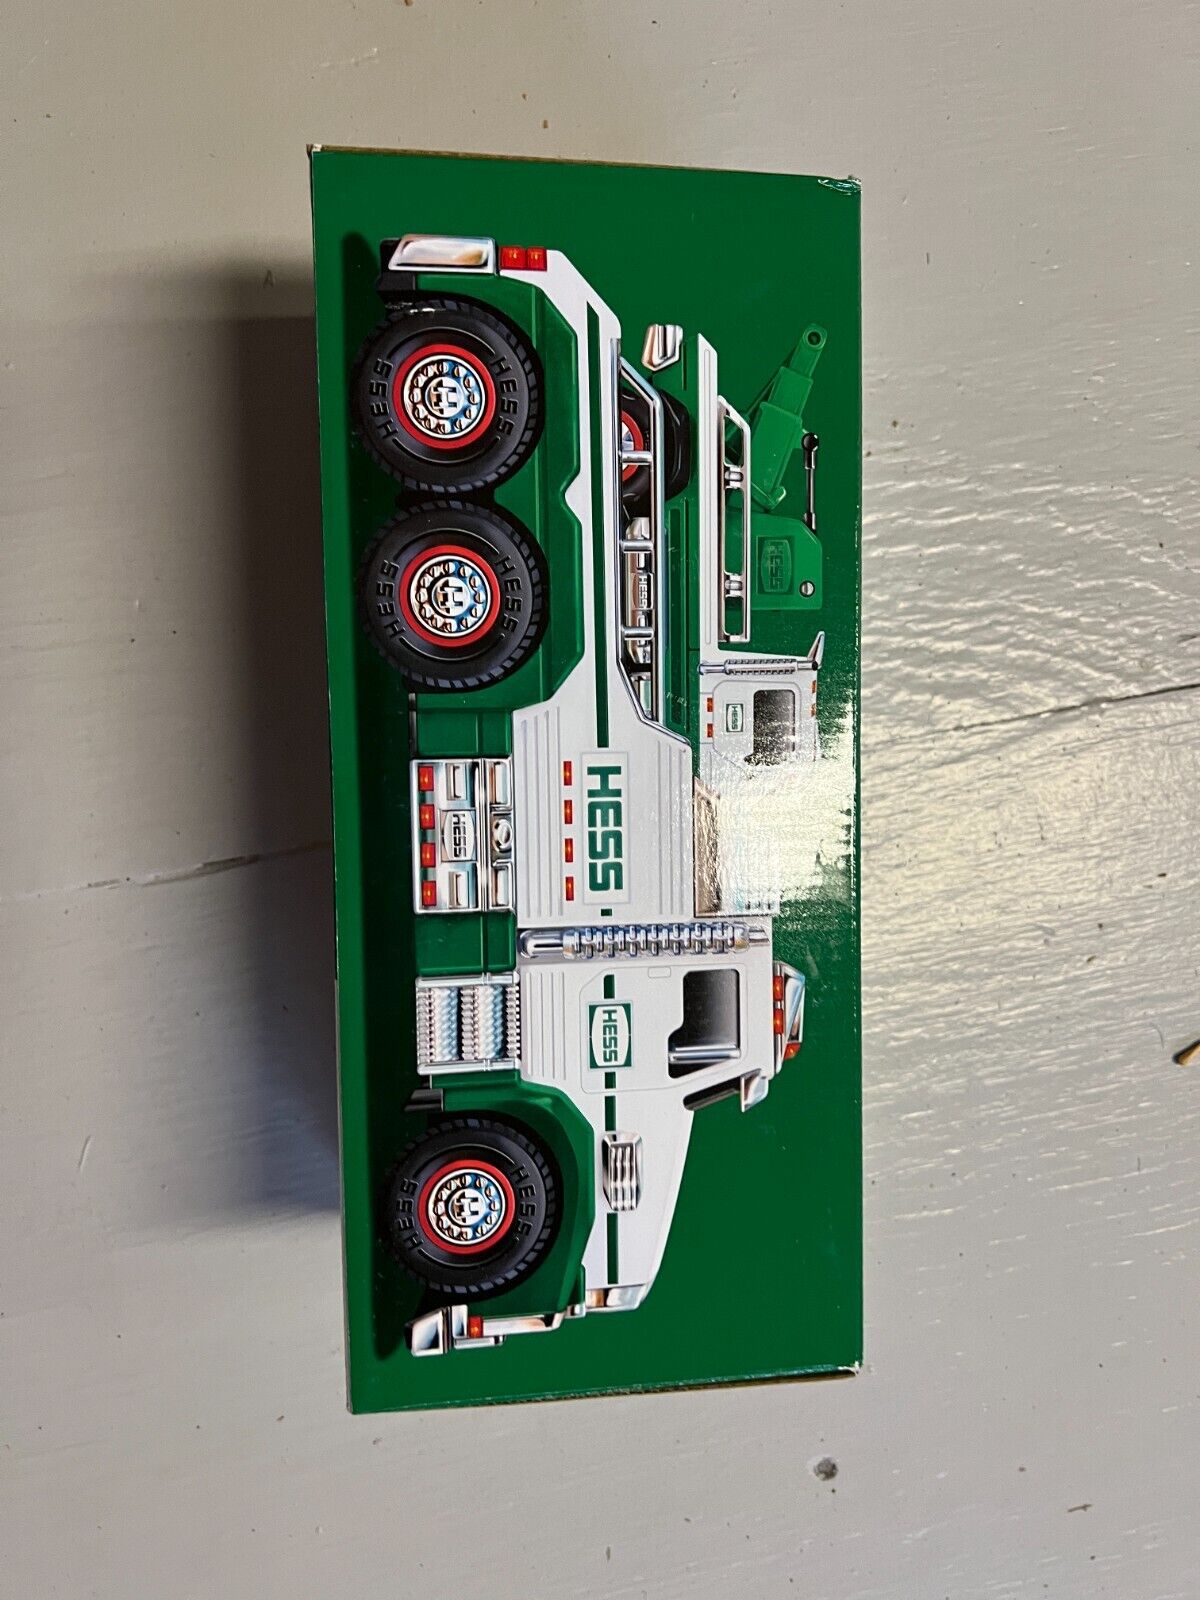 2019 Hess Truck, Tow Truck Rescue Team Toy Collectible